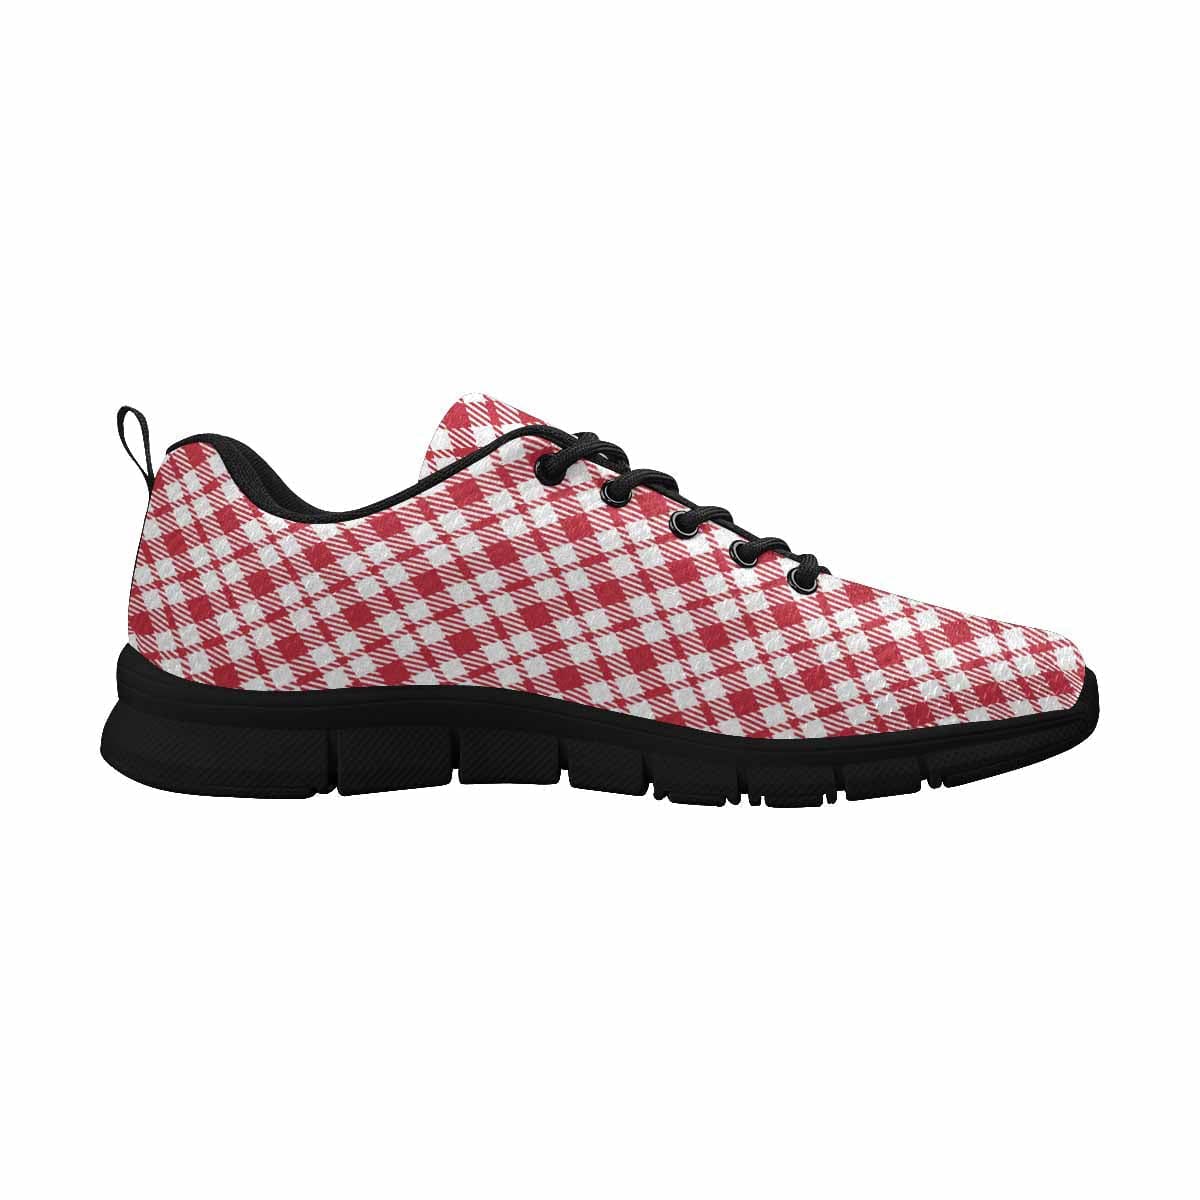 Sneakers For Men Buffalo Plaid Red And White - Running Shoes Dg858 - Mens